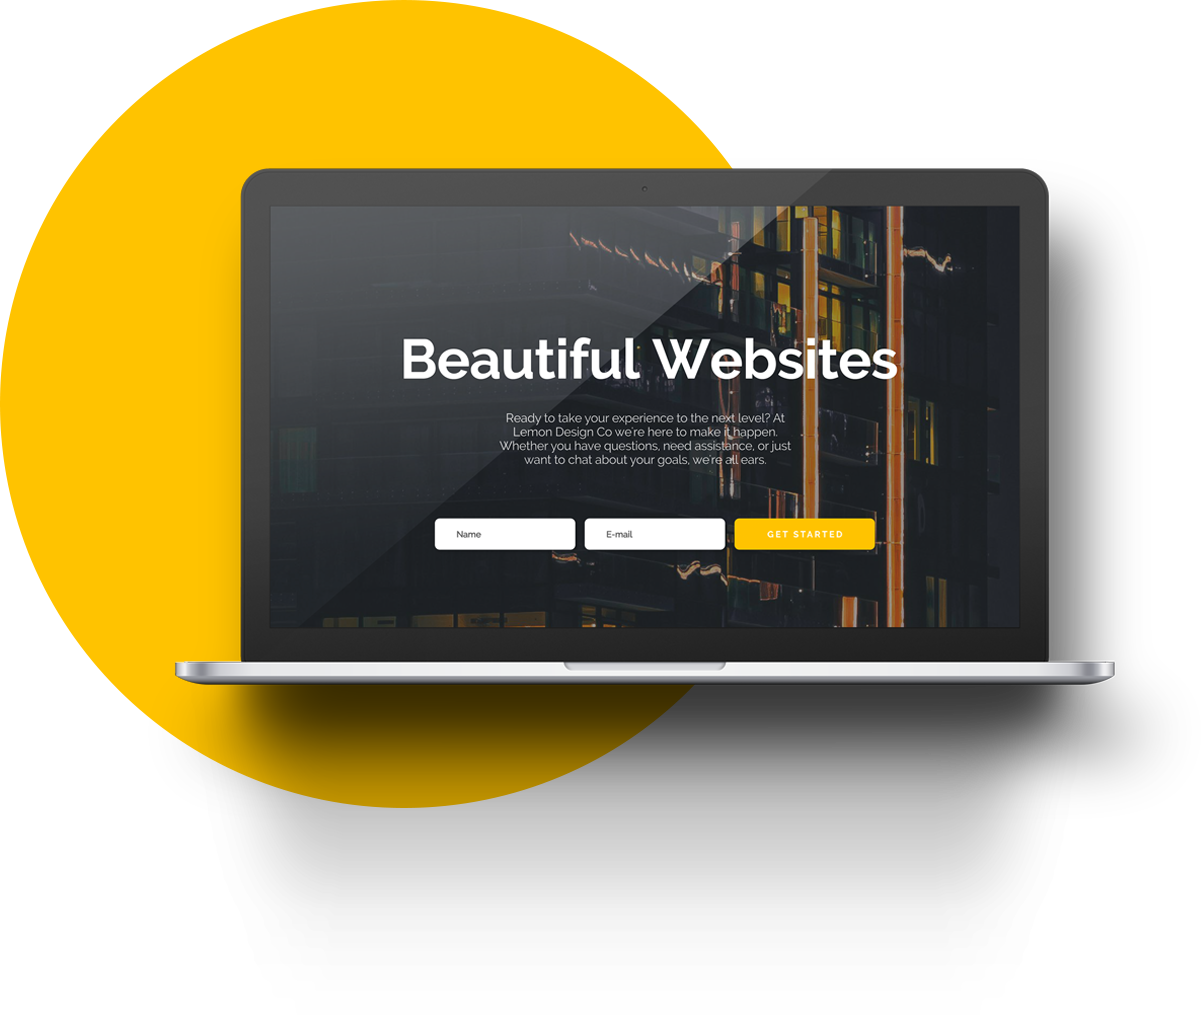 A laptop displaying a website. The page says Beautiful Websites with a contact form below.